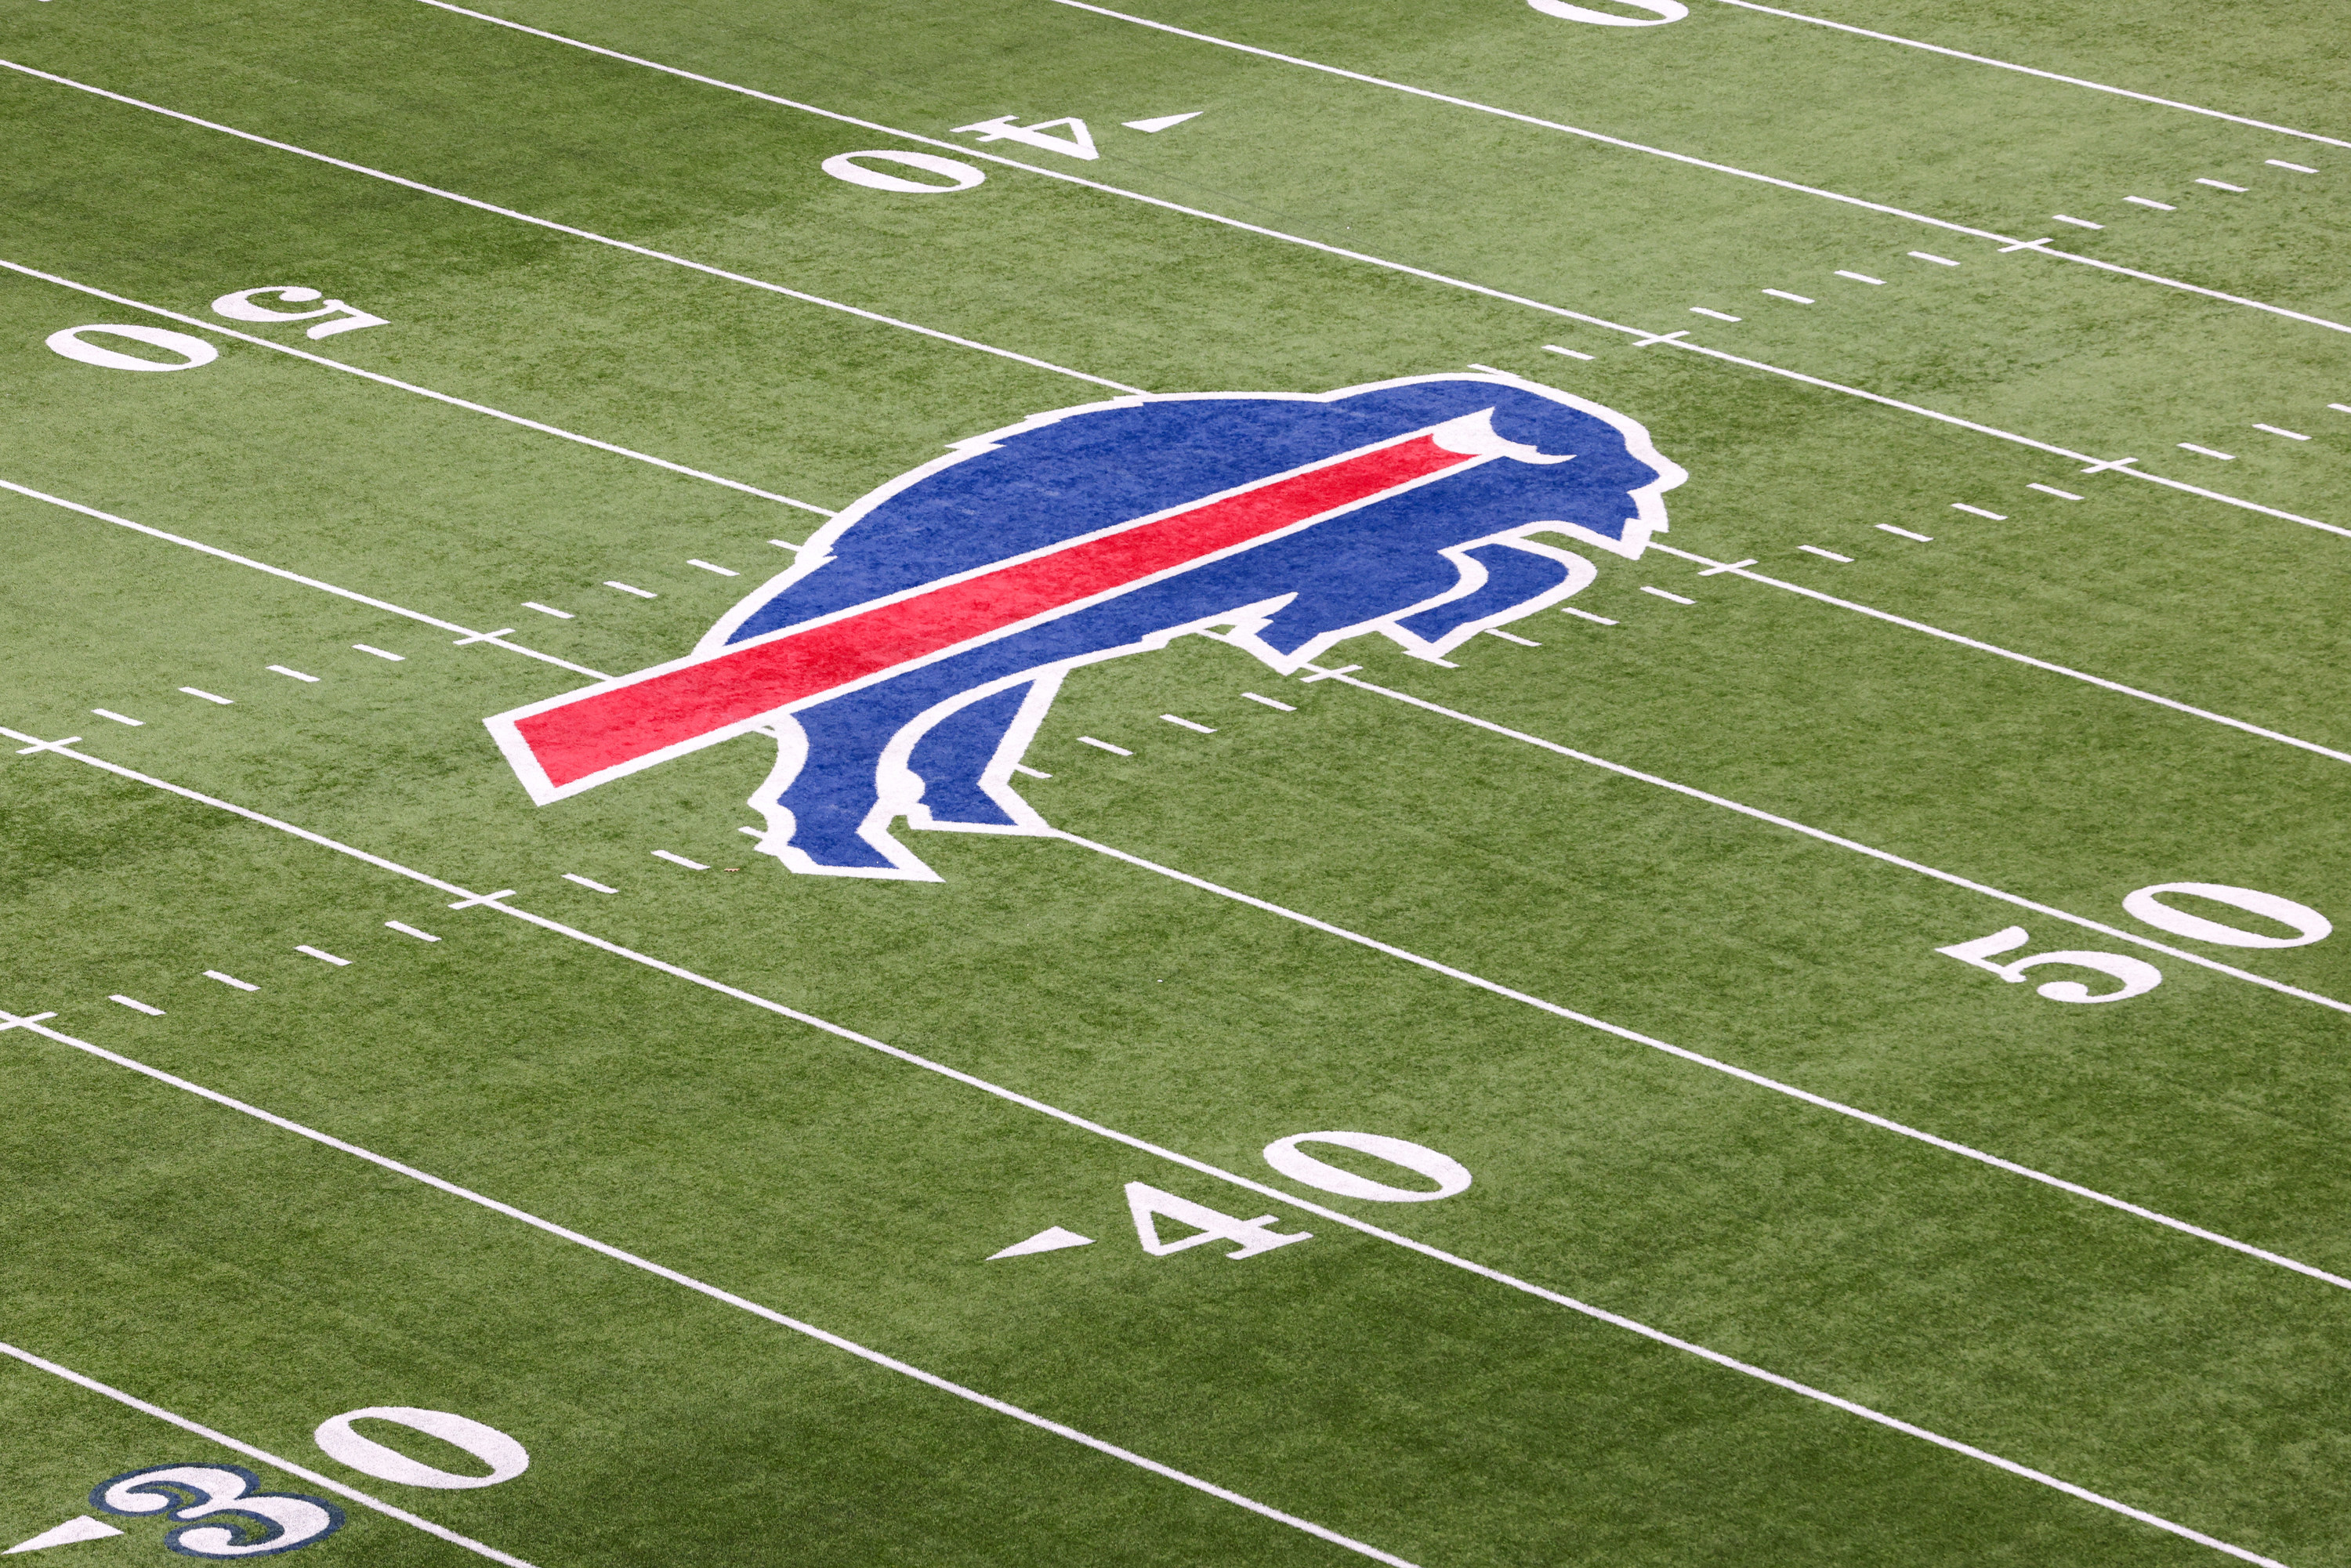 The Buffalo Bills logo is seen on the field prior to a game against the Cincinnati Bengals in the AFC Divisional Playoff game at Highmark Stadium on January 22, 2023 in Orchard Park, New York